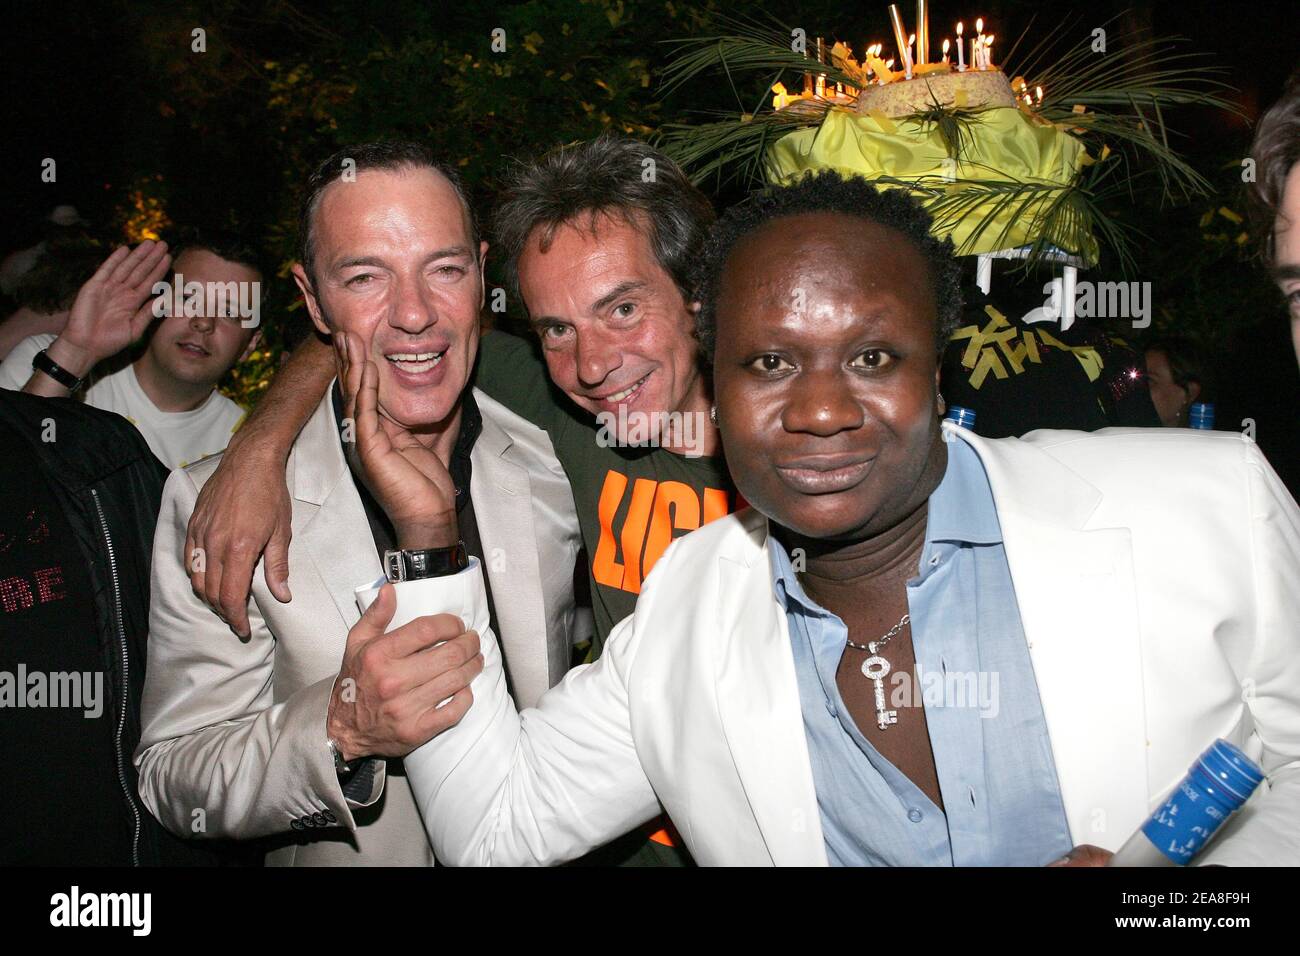 From L to R : Tony Gomez, Basile de Koch and Magloire attend his birthday bash at l'Etoile in Paris on June 25, 2004. Photo by Laurent Zabulon/ABACA. Stock Photo